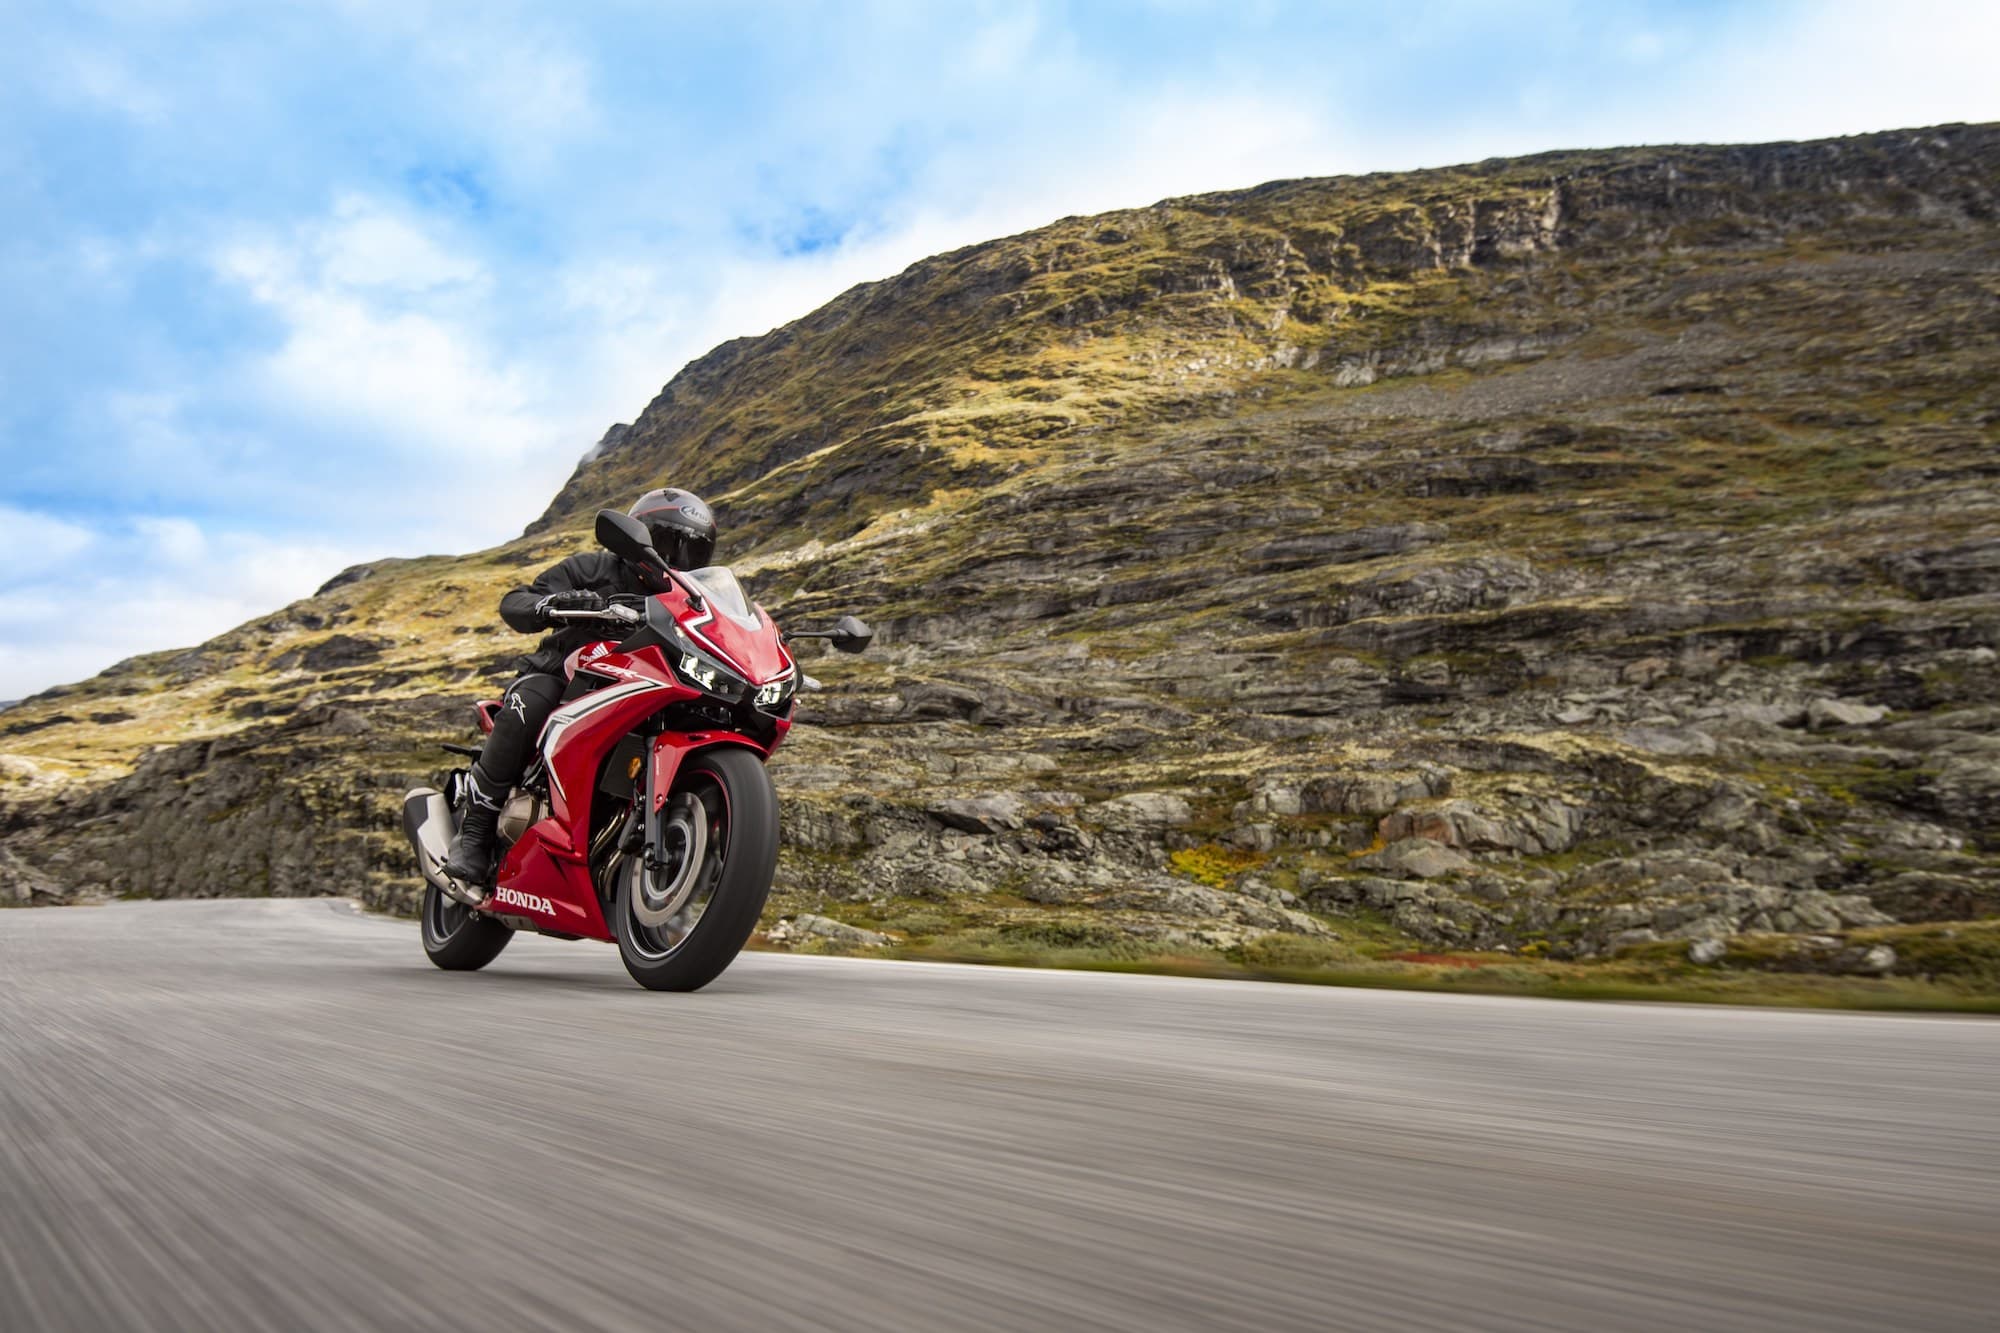 2019-2021 Honda CBR500R riding on road with mountain and sky in background